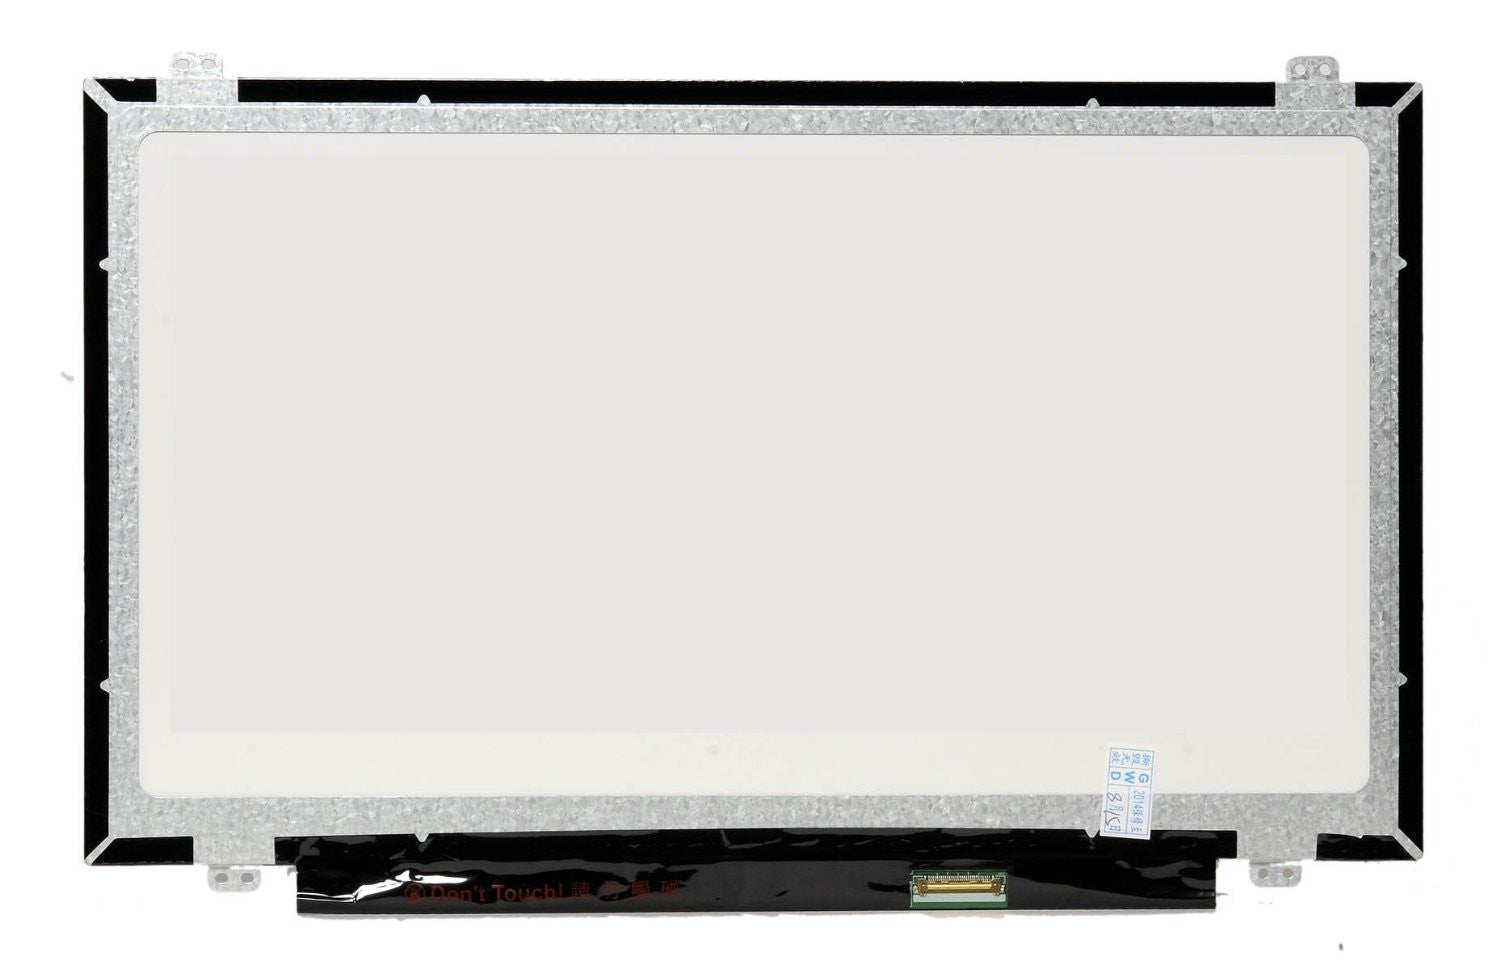 14.0 SLIM SMALL CONNECTOR LAPTOP SCREEN.